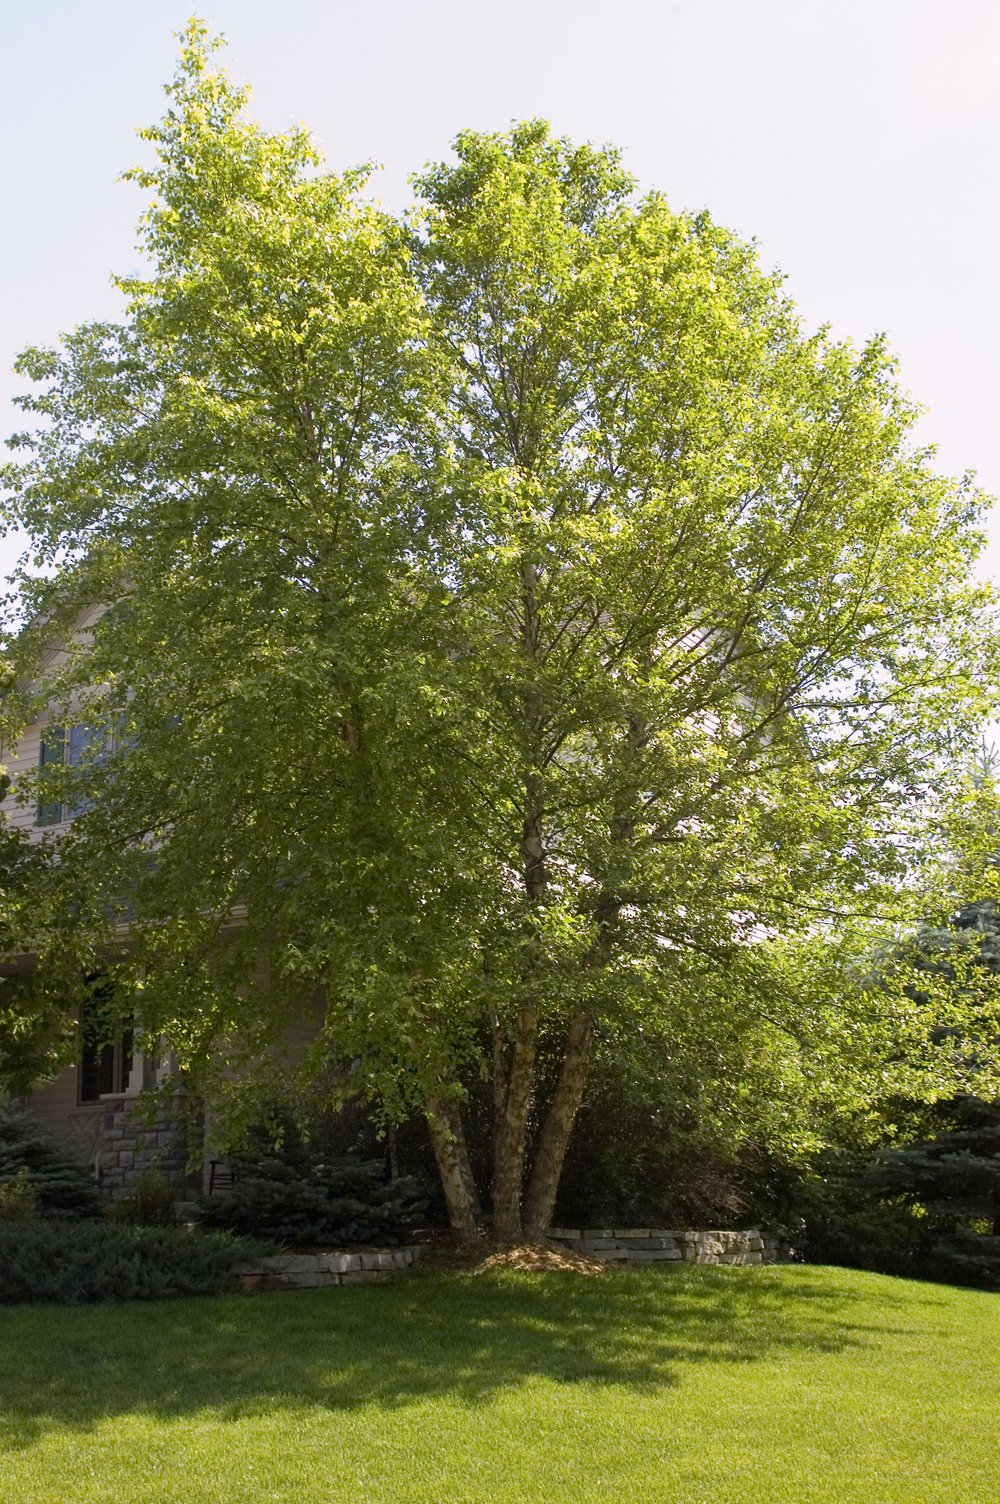 Heritage River Birch Tree for Sale – Shipped Direct to You - PlantingTree